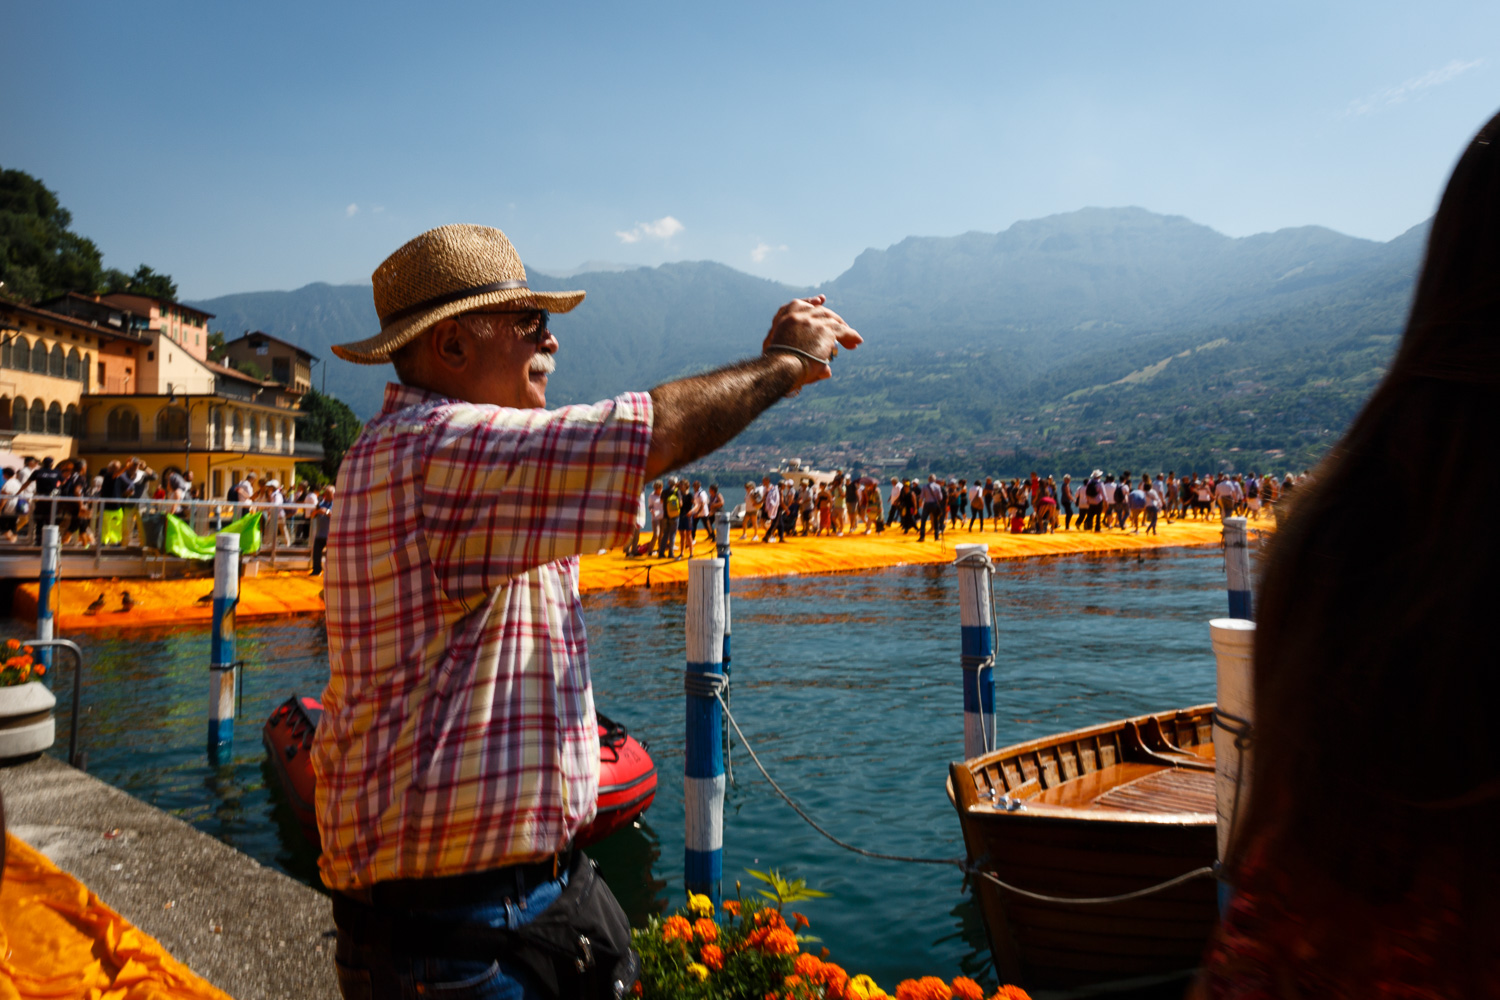 The Floating Piers - Man taking a Picture